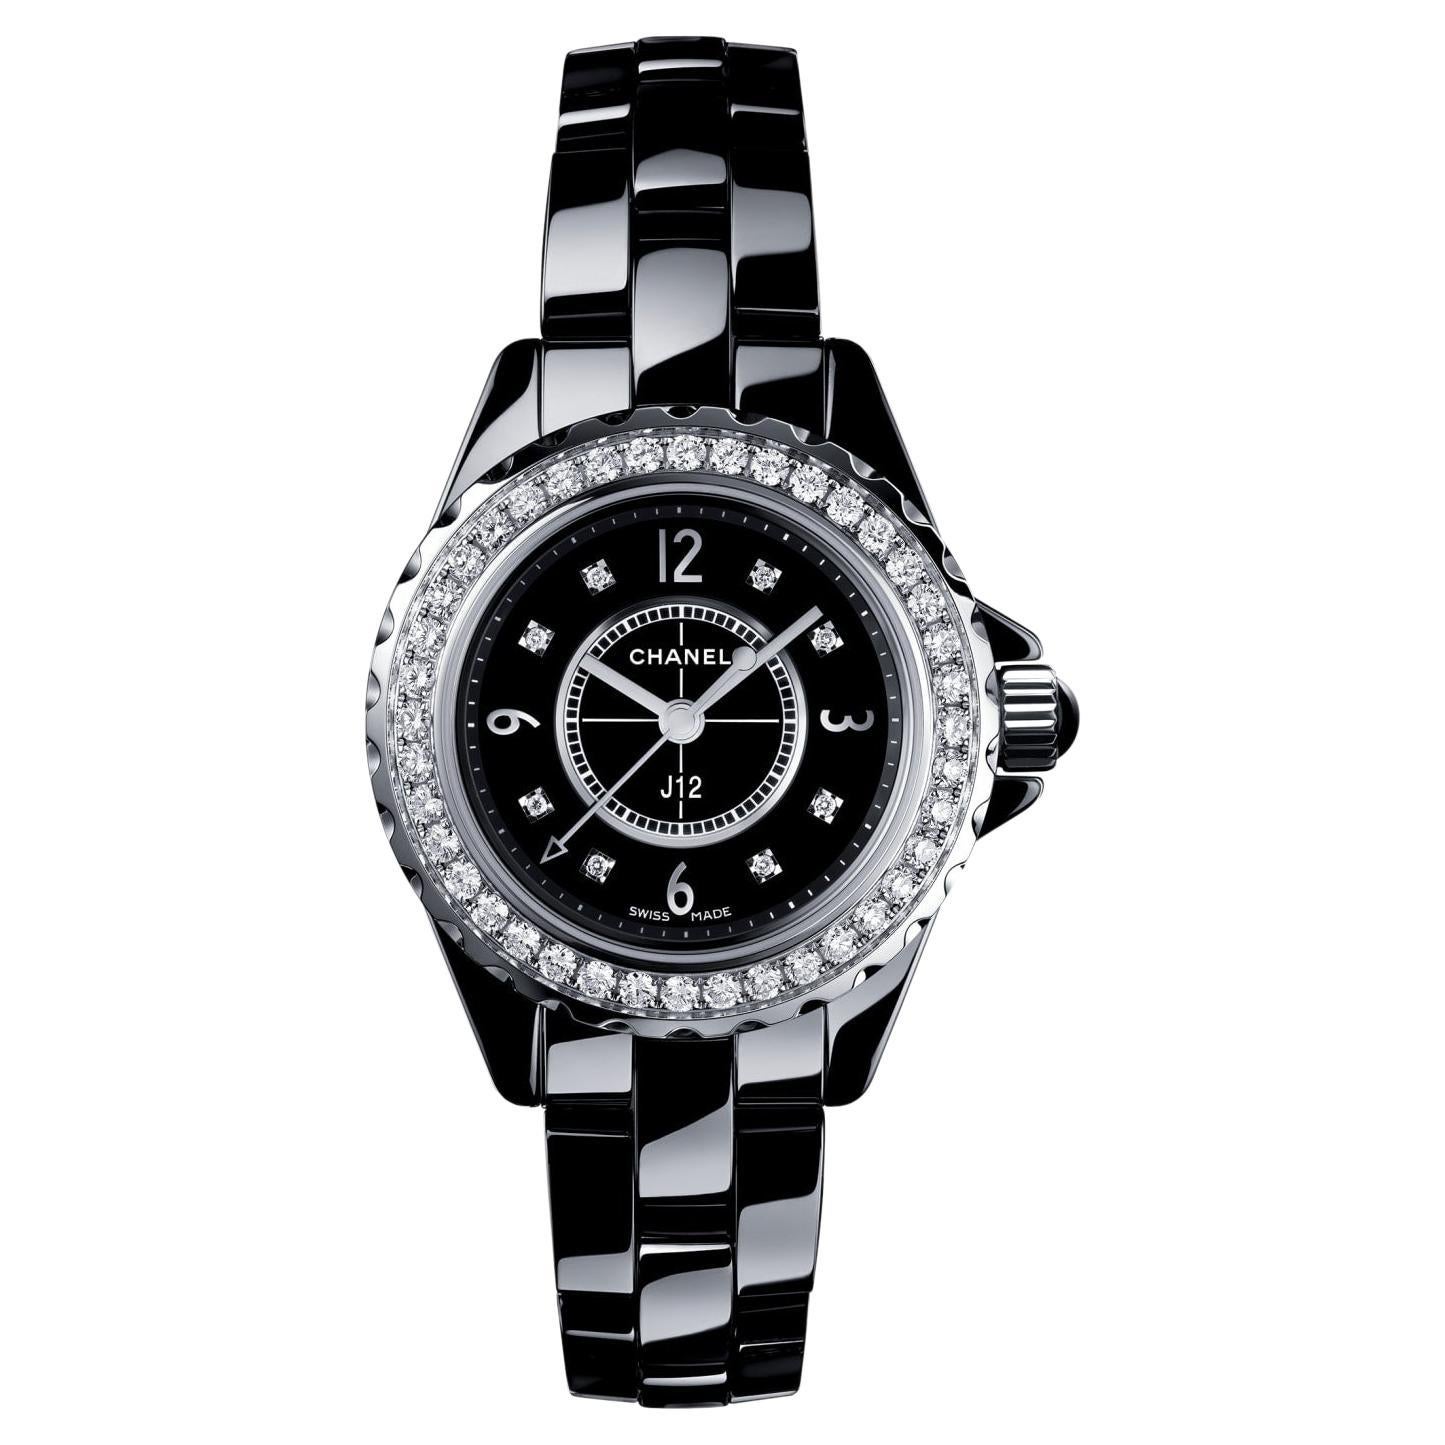 Chanel J12 Ceramic Watch 29mm Diamond Bezel and Indicators Box and Papers